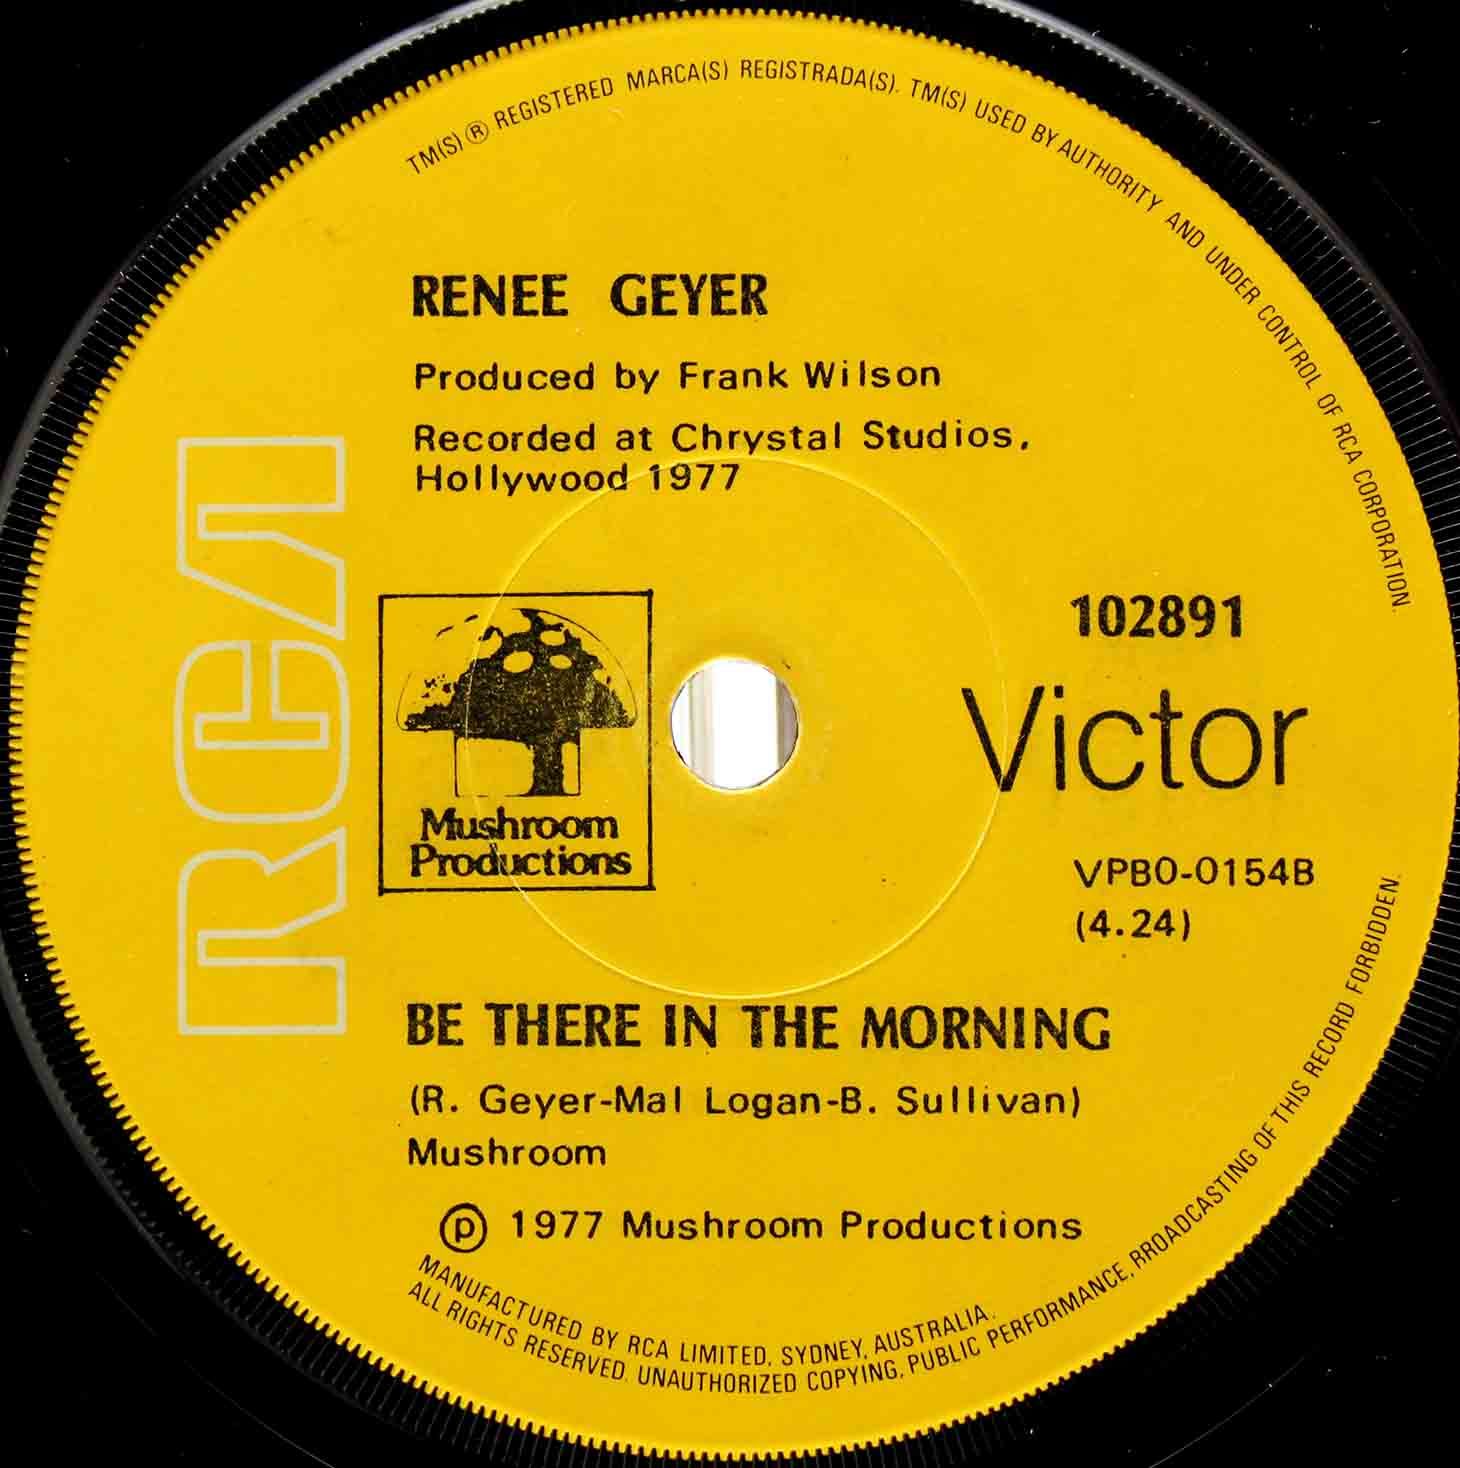 Renee Geyer Band (1977) – Be There In The Morning 02